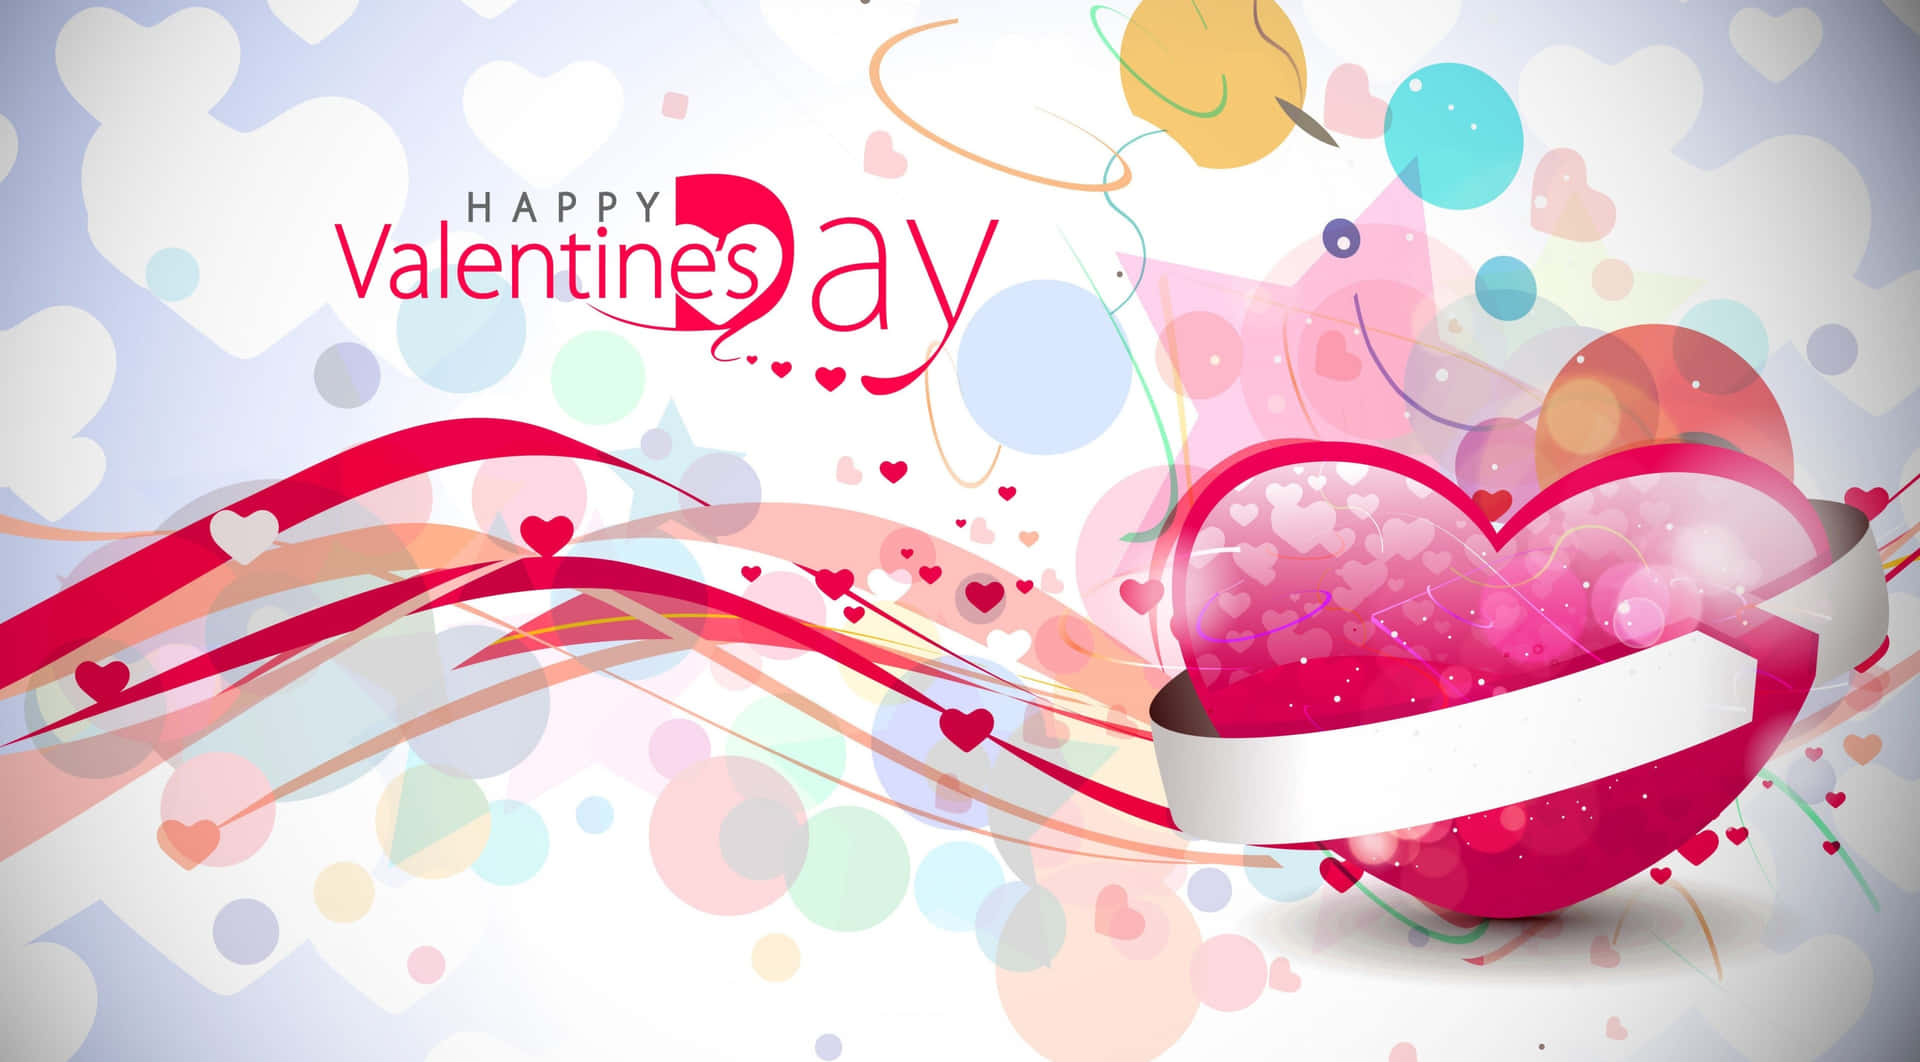 Spread The Love This Valentine’s Day! Background